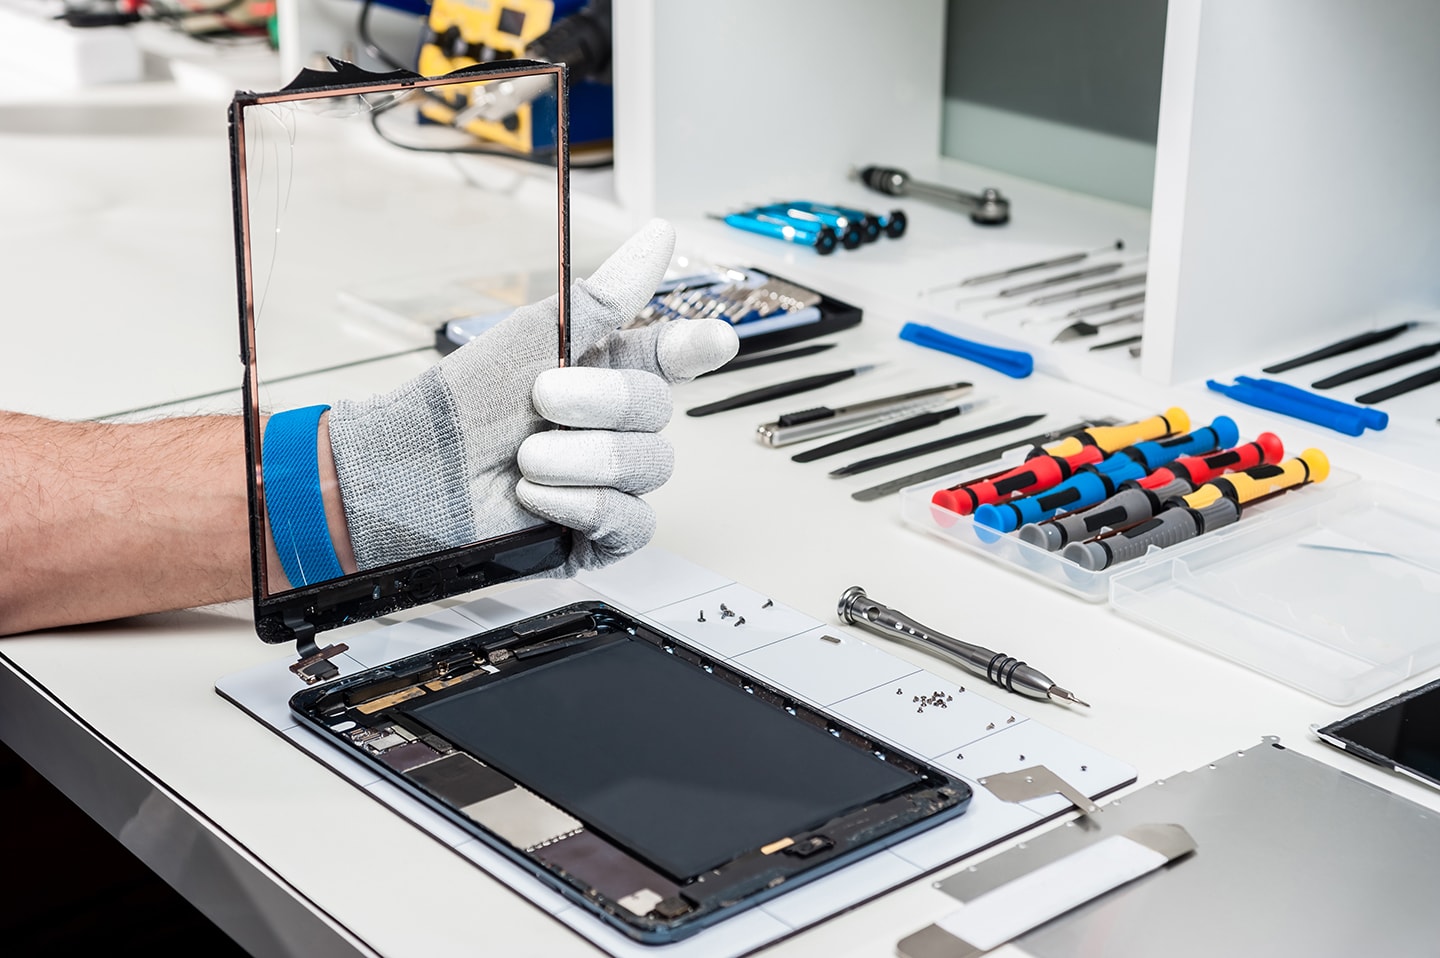 iPad Repairs Near Me: Trustworthy Solutions by Entire Tech